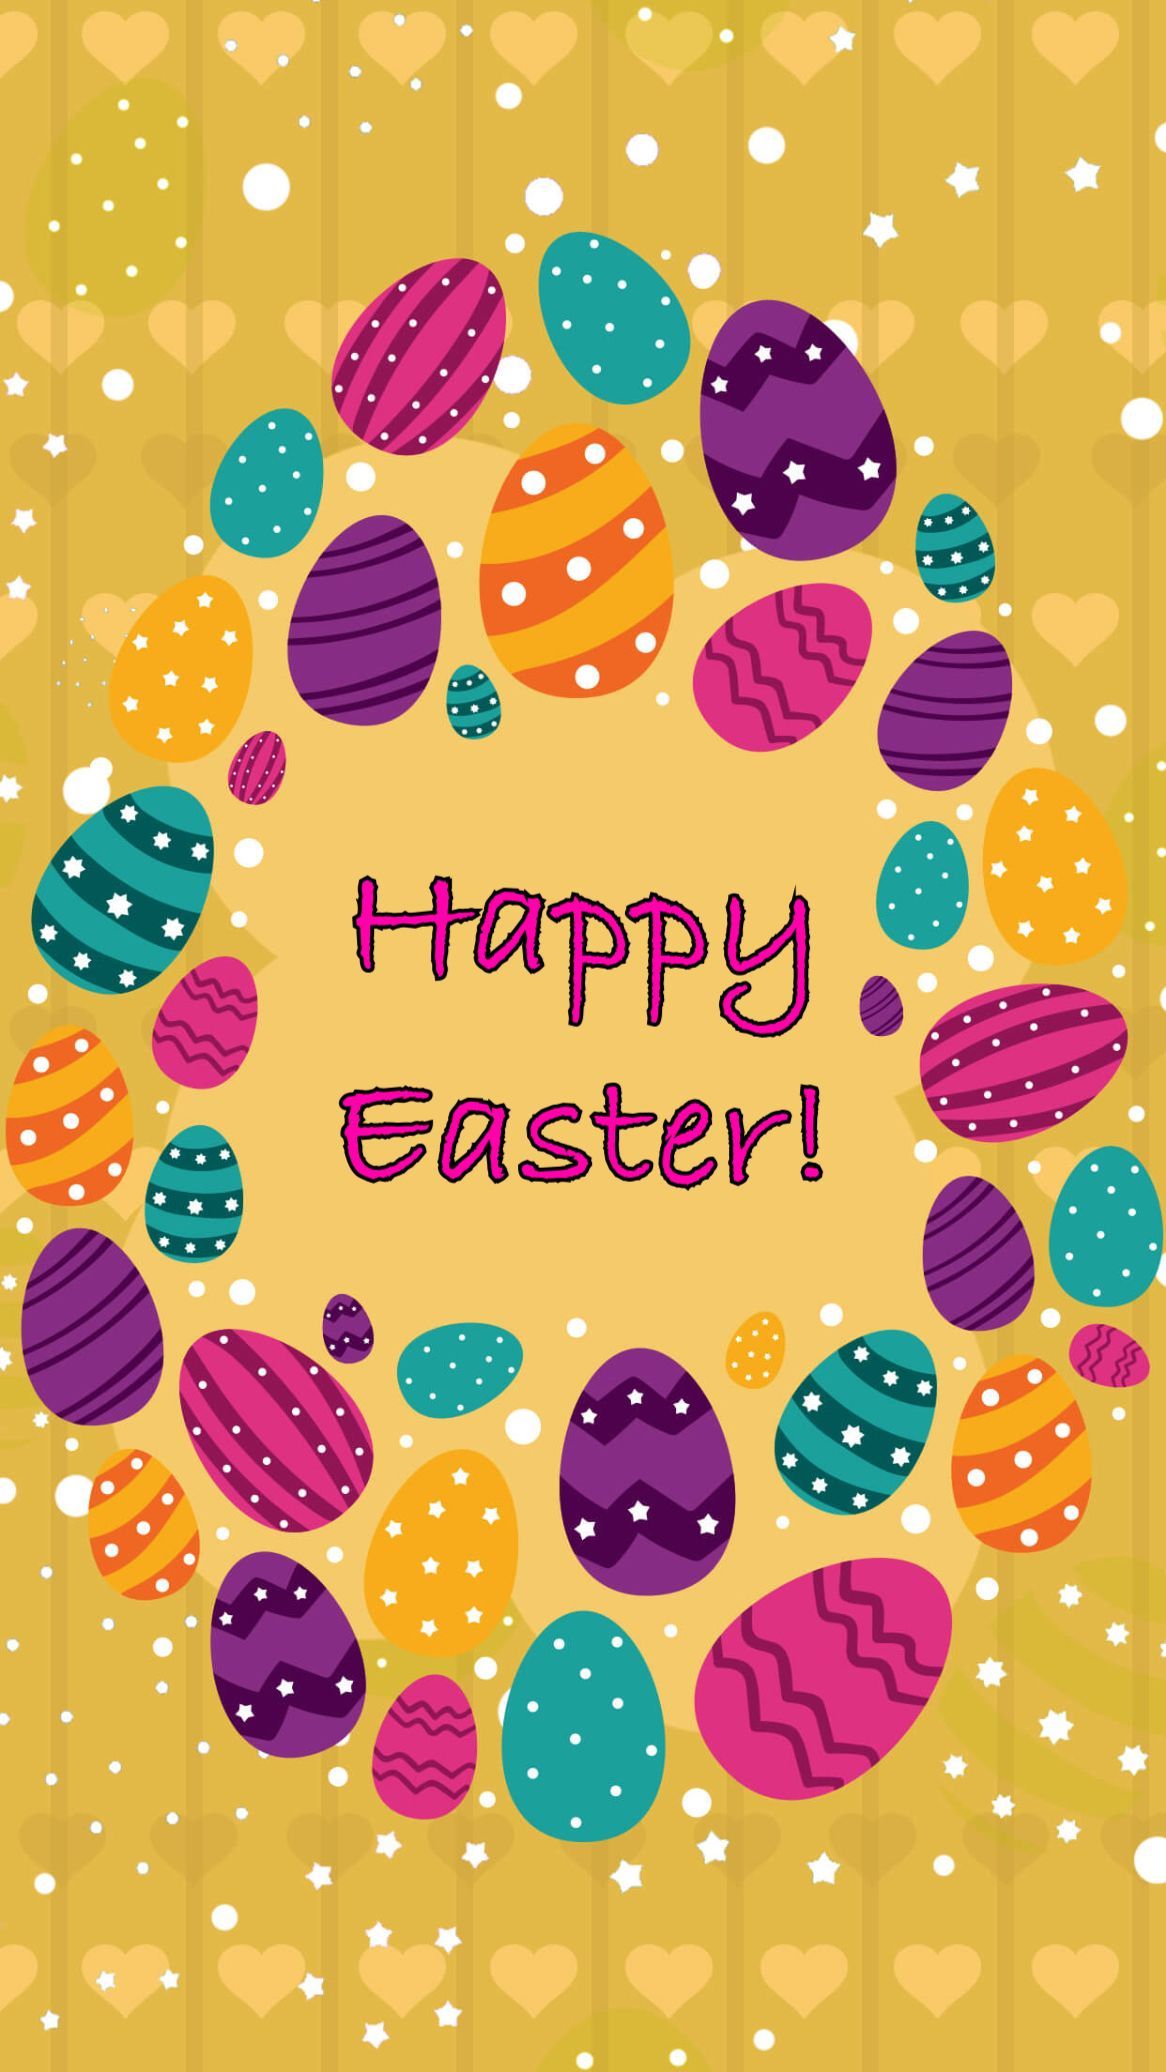 Easter wallpaper with quotes Happy easter quotes and easter quotations happy easter quotes